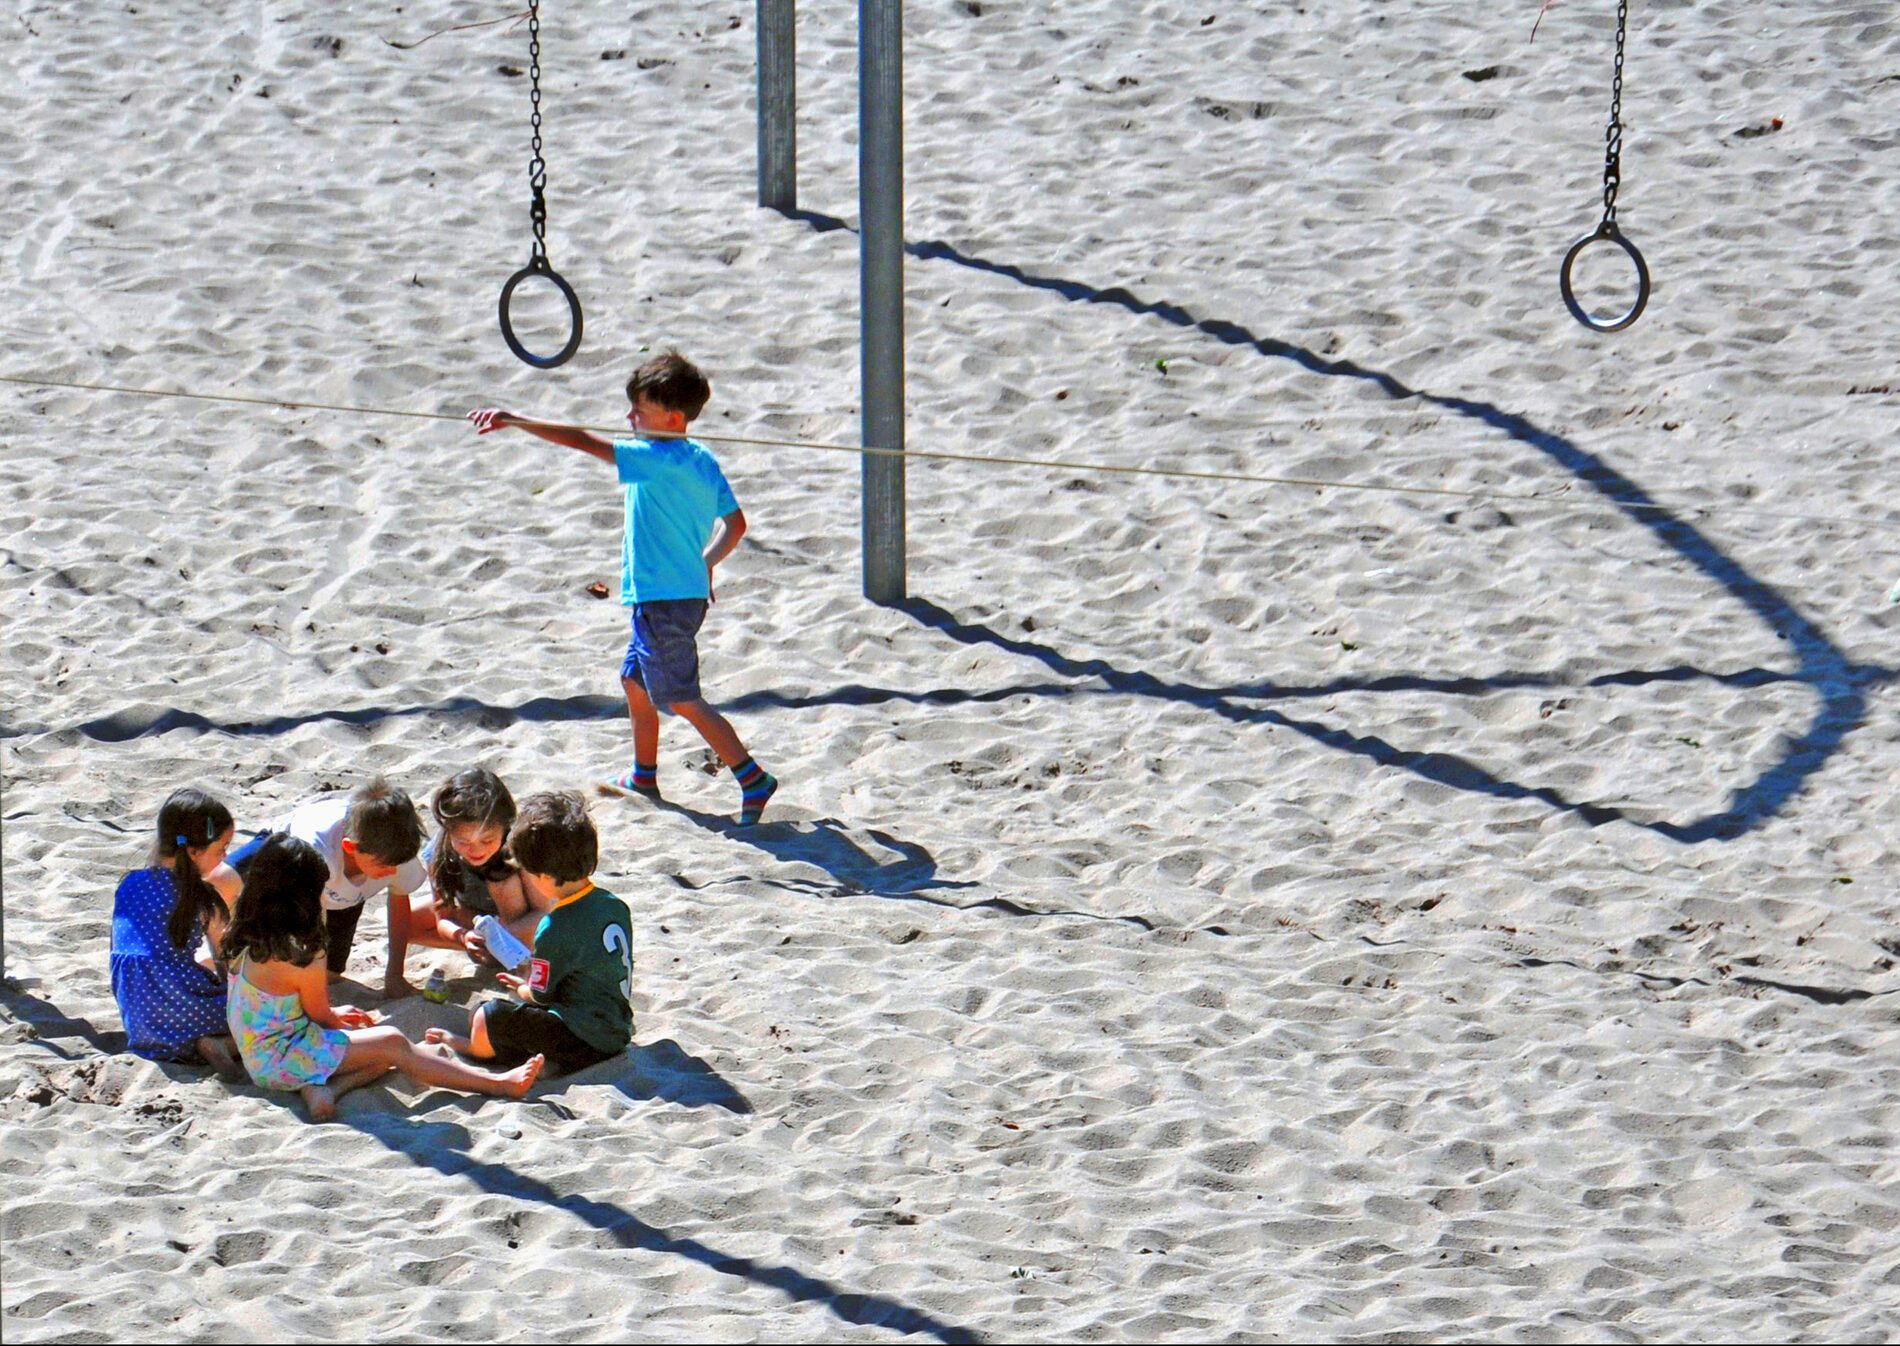 On a sandy beach, five kids sit close in a circle and another moves his hand along a long rope that is suspended four or five feet in the air. Two metal poles stick out of the sand, and two rings on chains hang down.